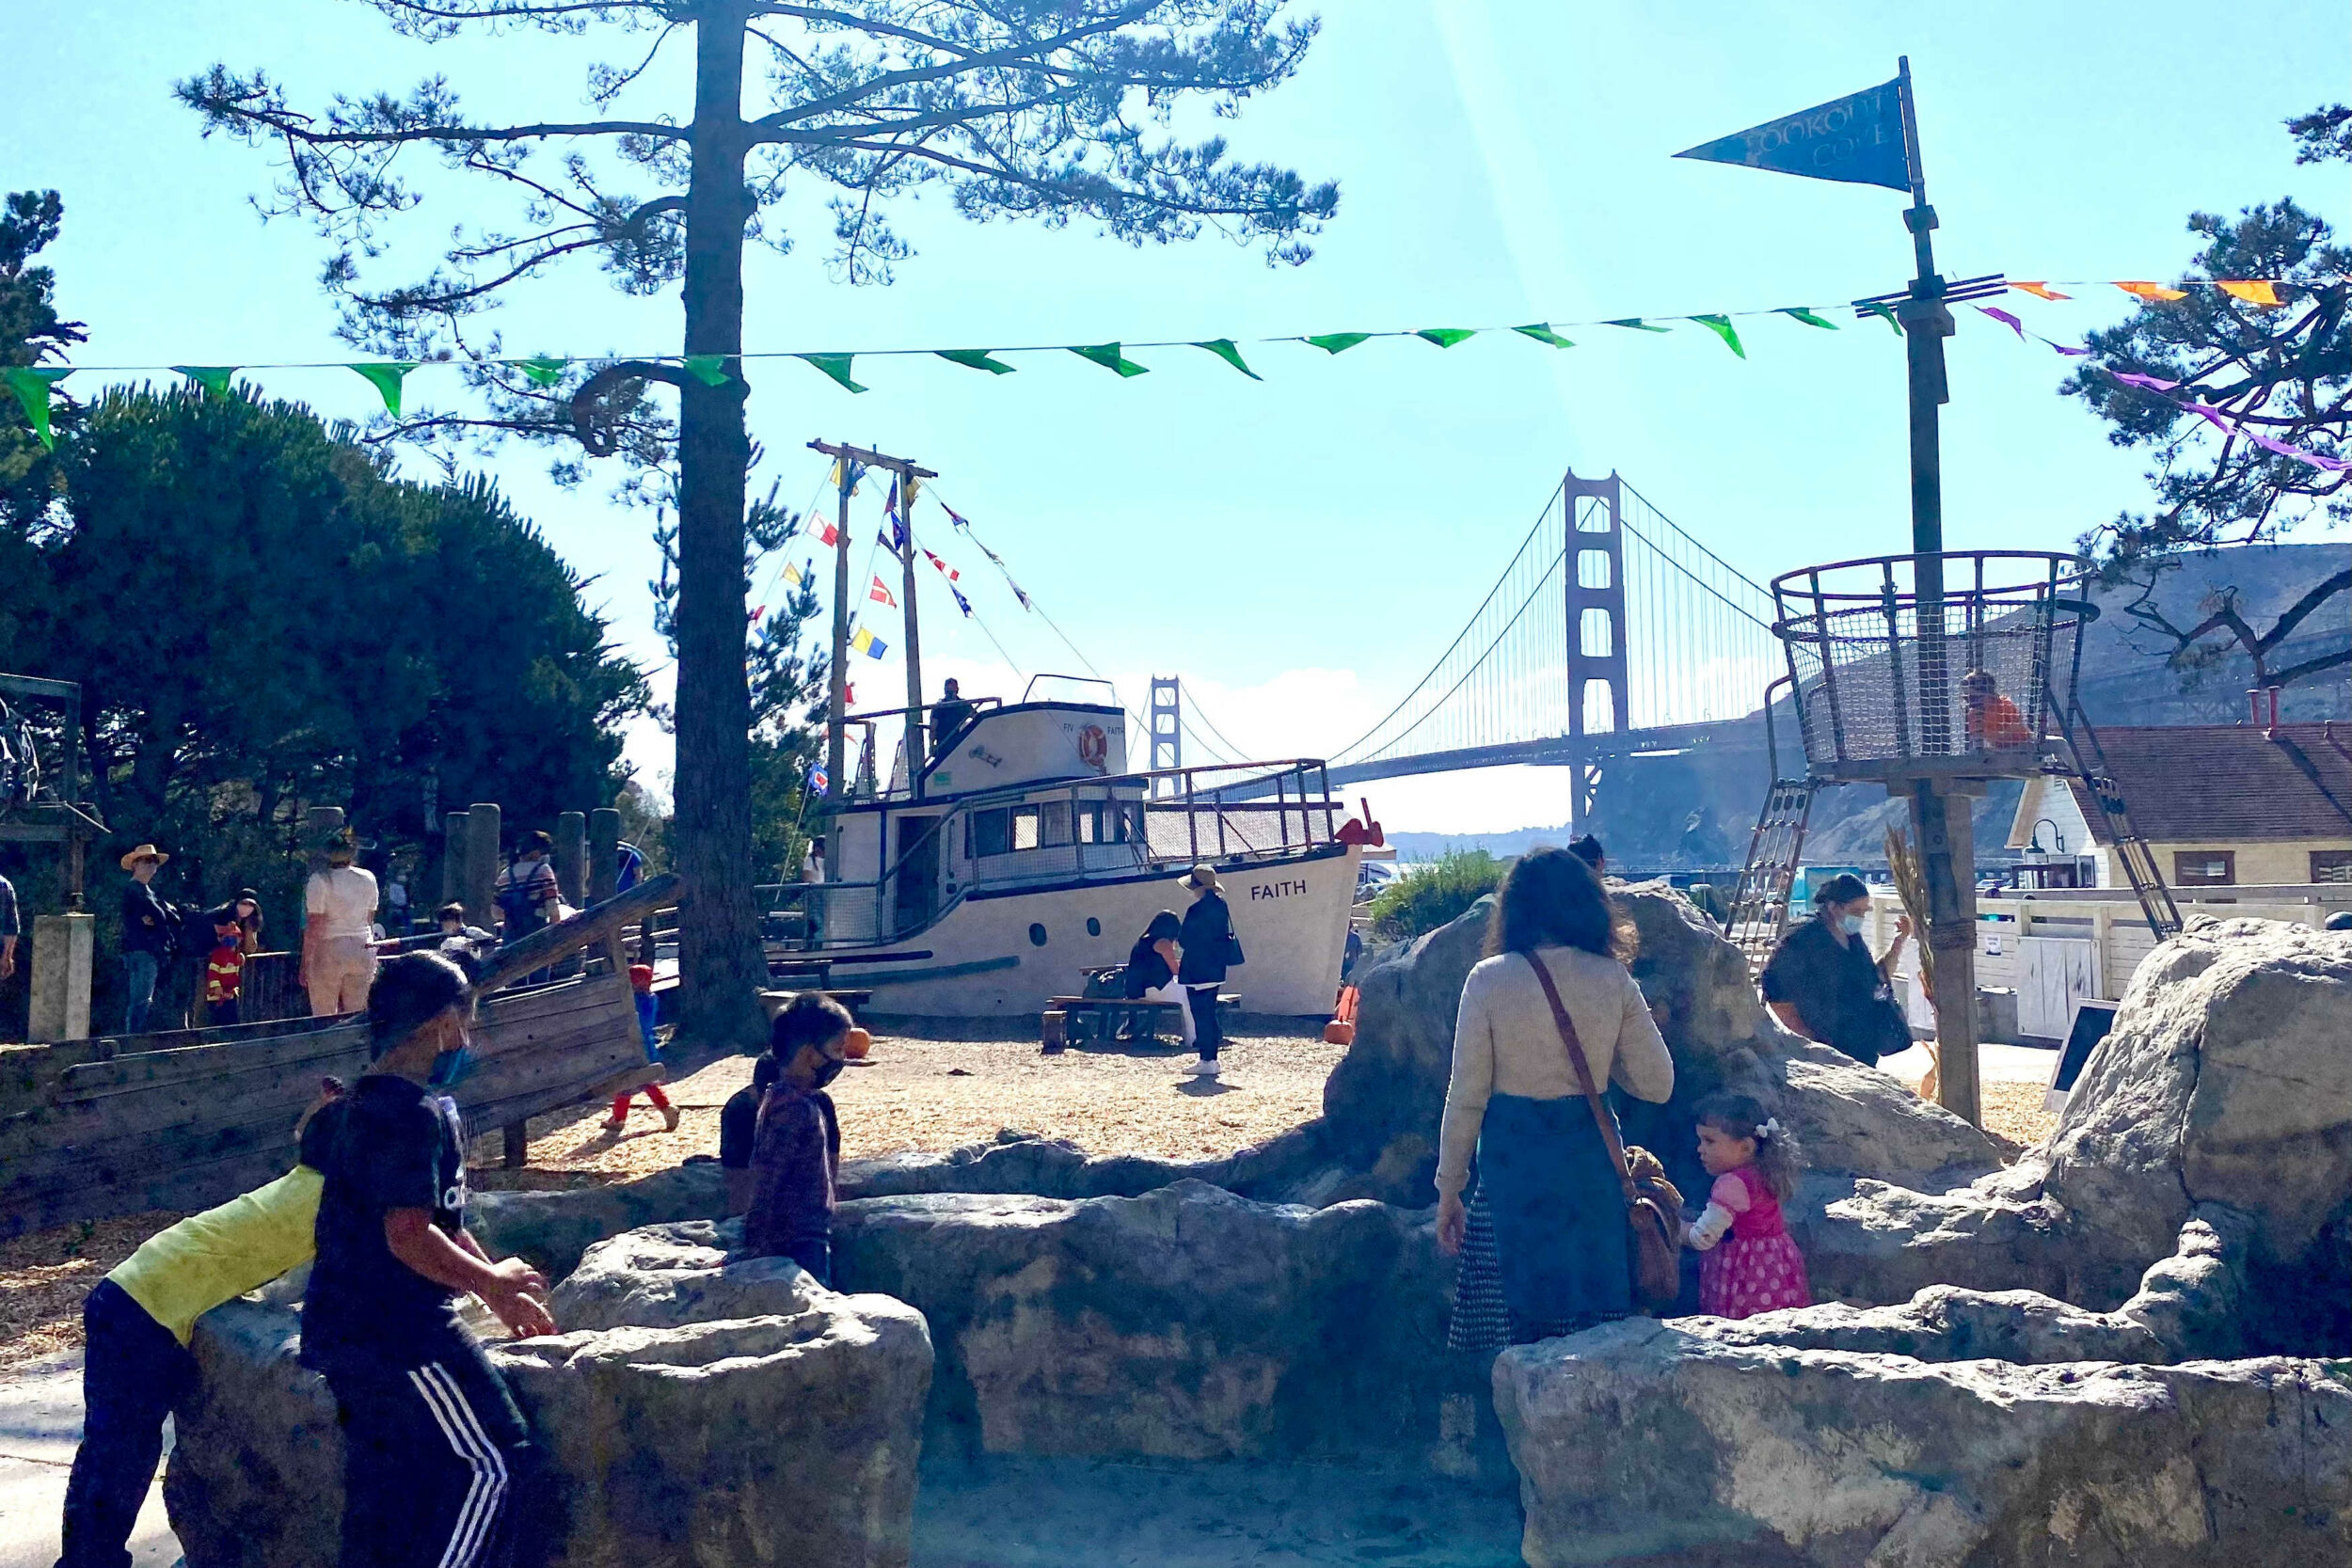 People milling around an outdoor kids' park with the Golden Gate Bridge in the background.